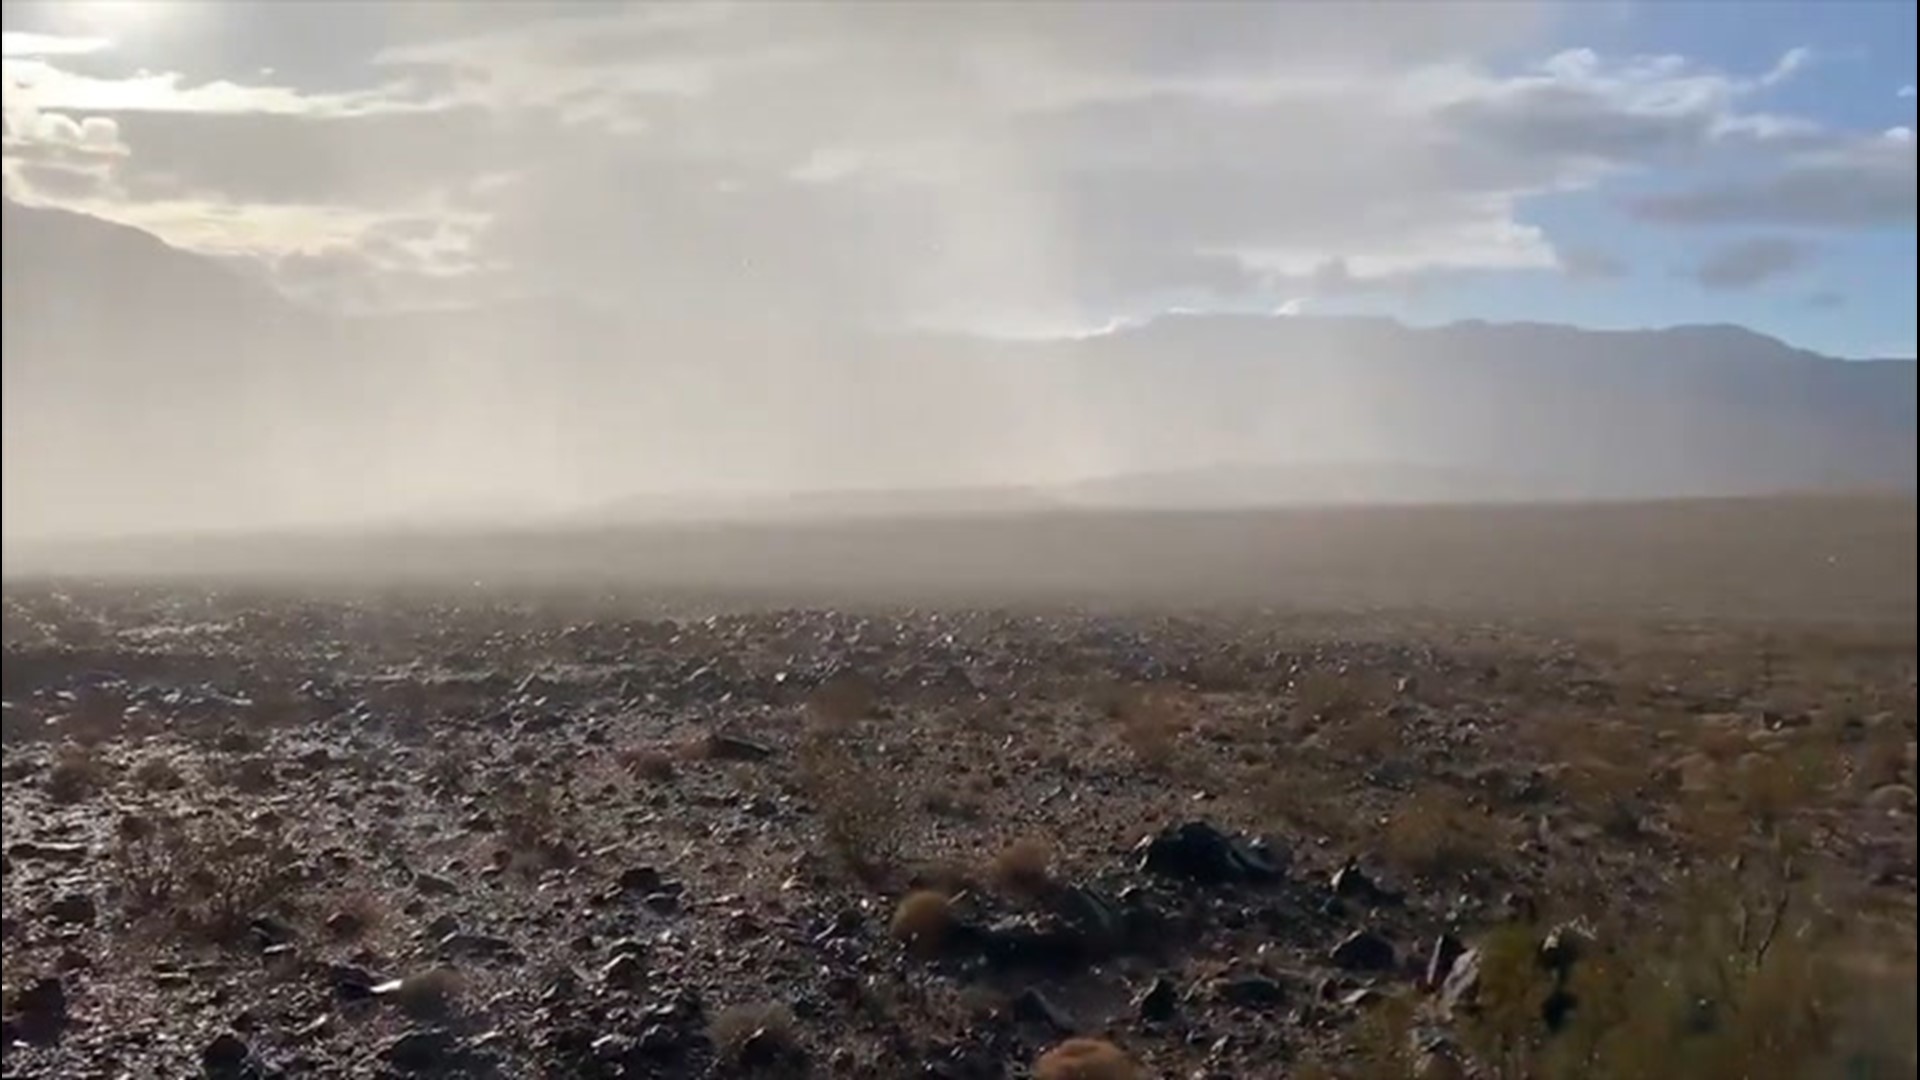 Despite the shining sun, rain fell on Death Valley, California, on Jan. 24, giving some life to the dry area.